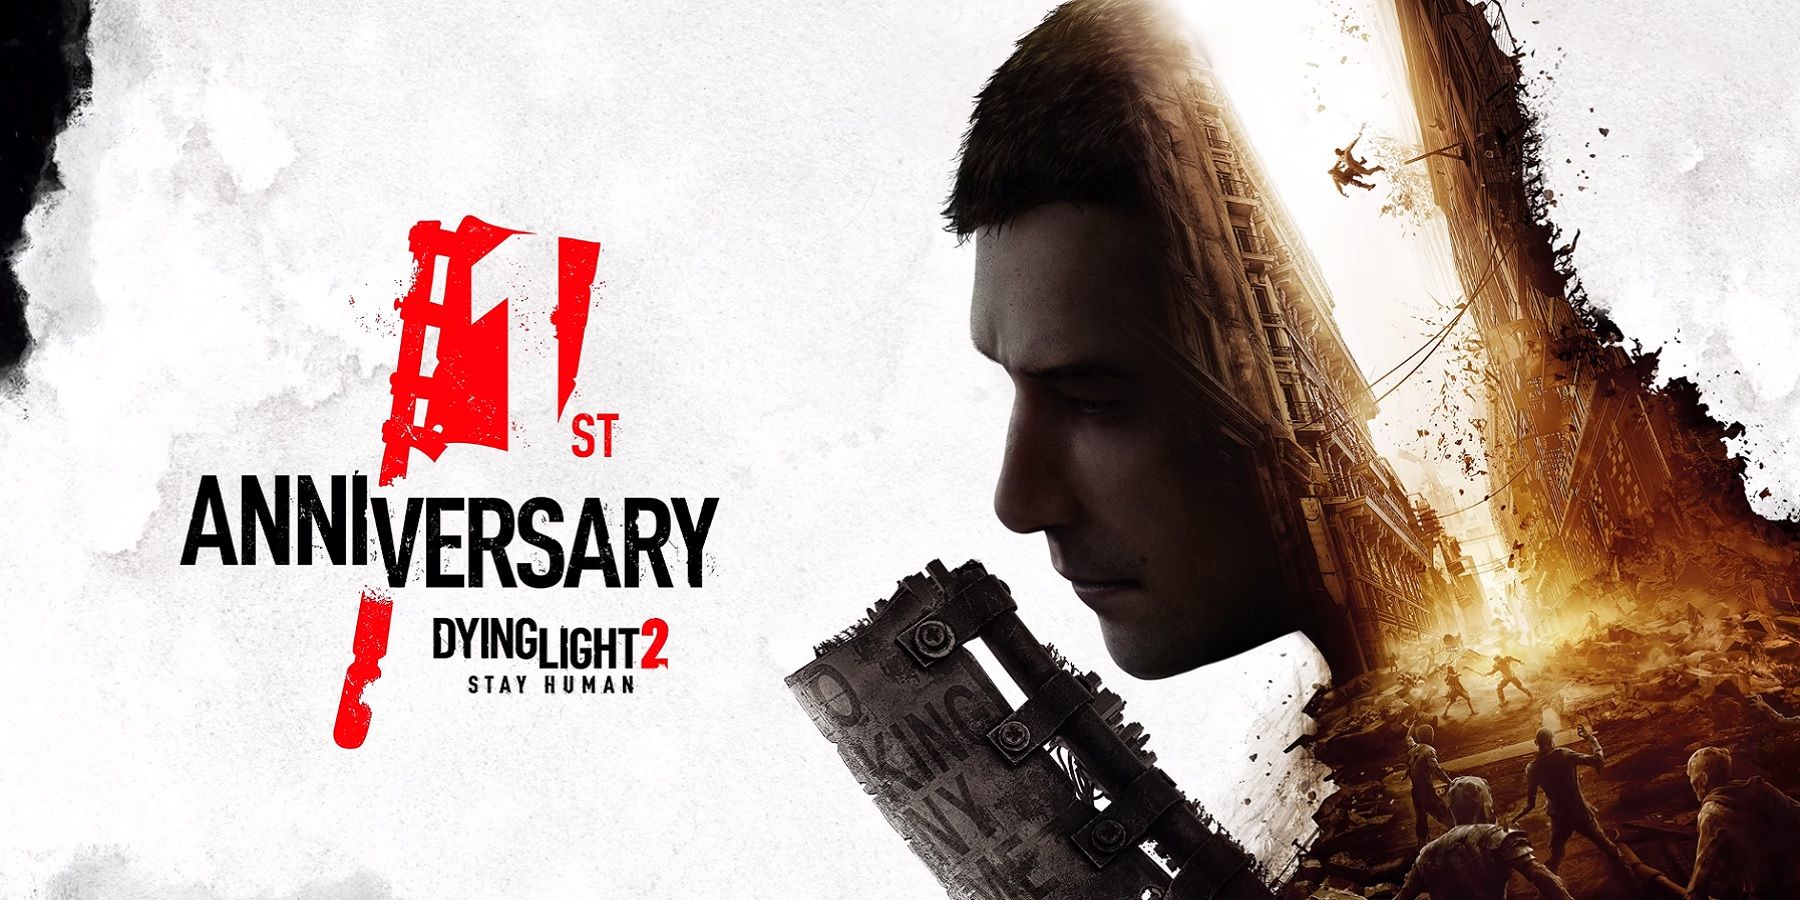 The Dying Light 2 cover showing the words "1st Anniversary."